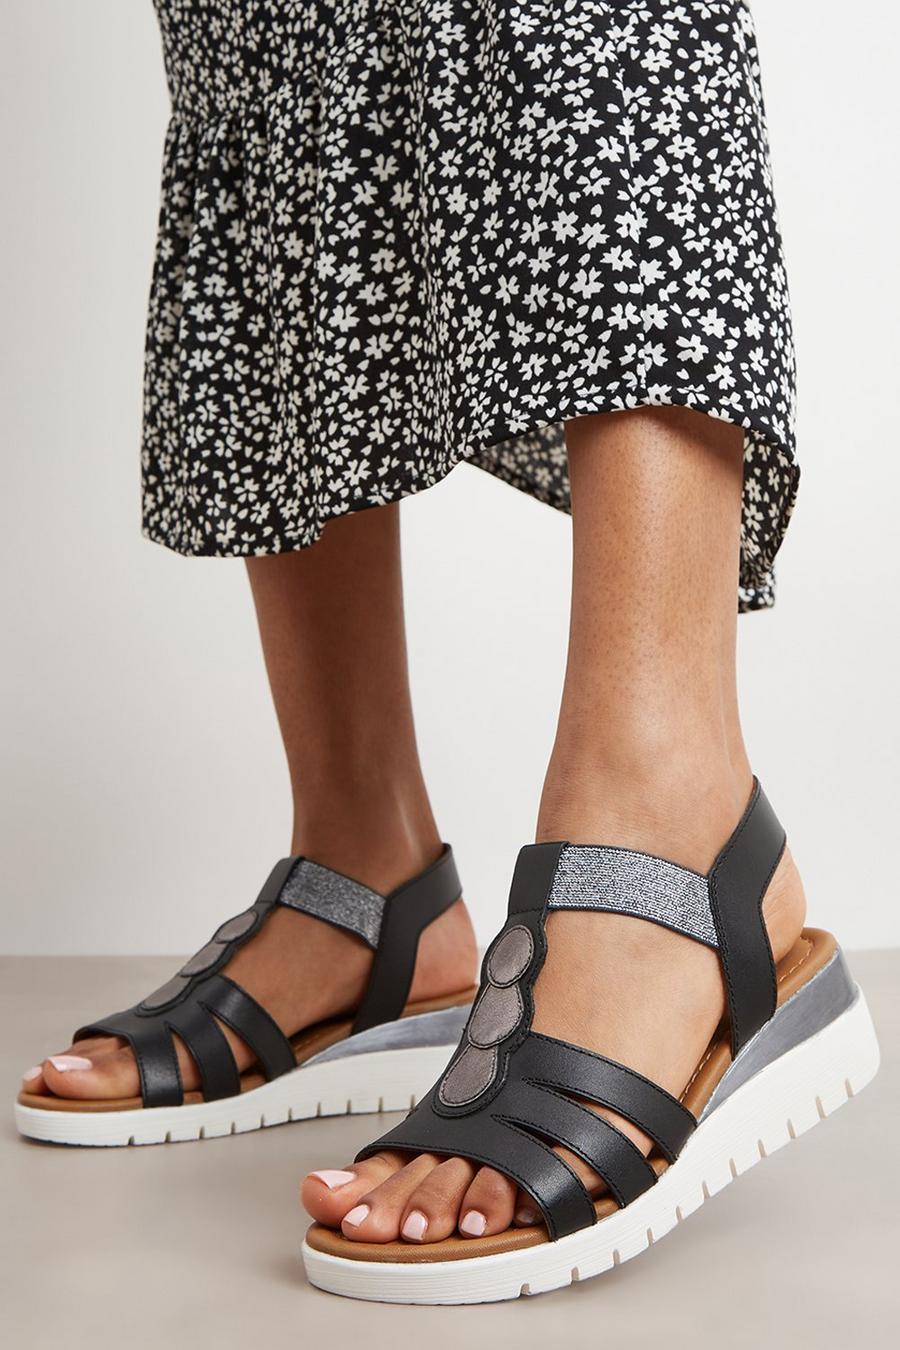 Good For The Sole: Hattie Leather Wide Fit Wedge Sandal